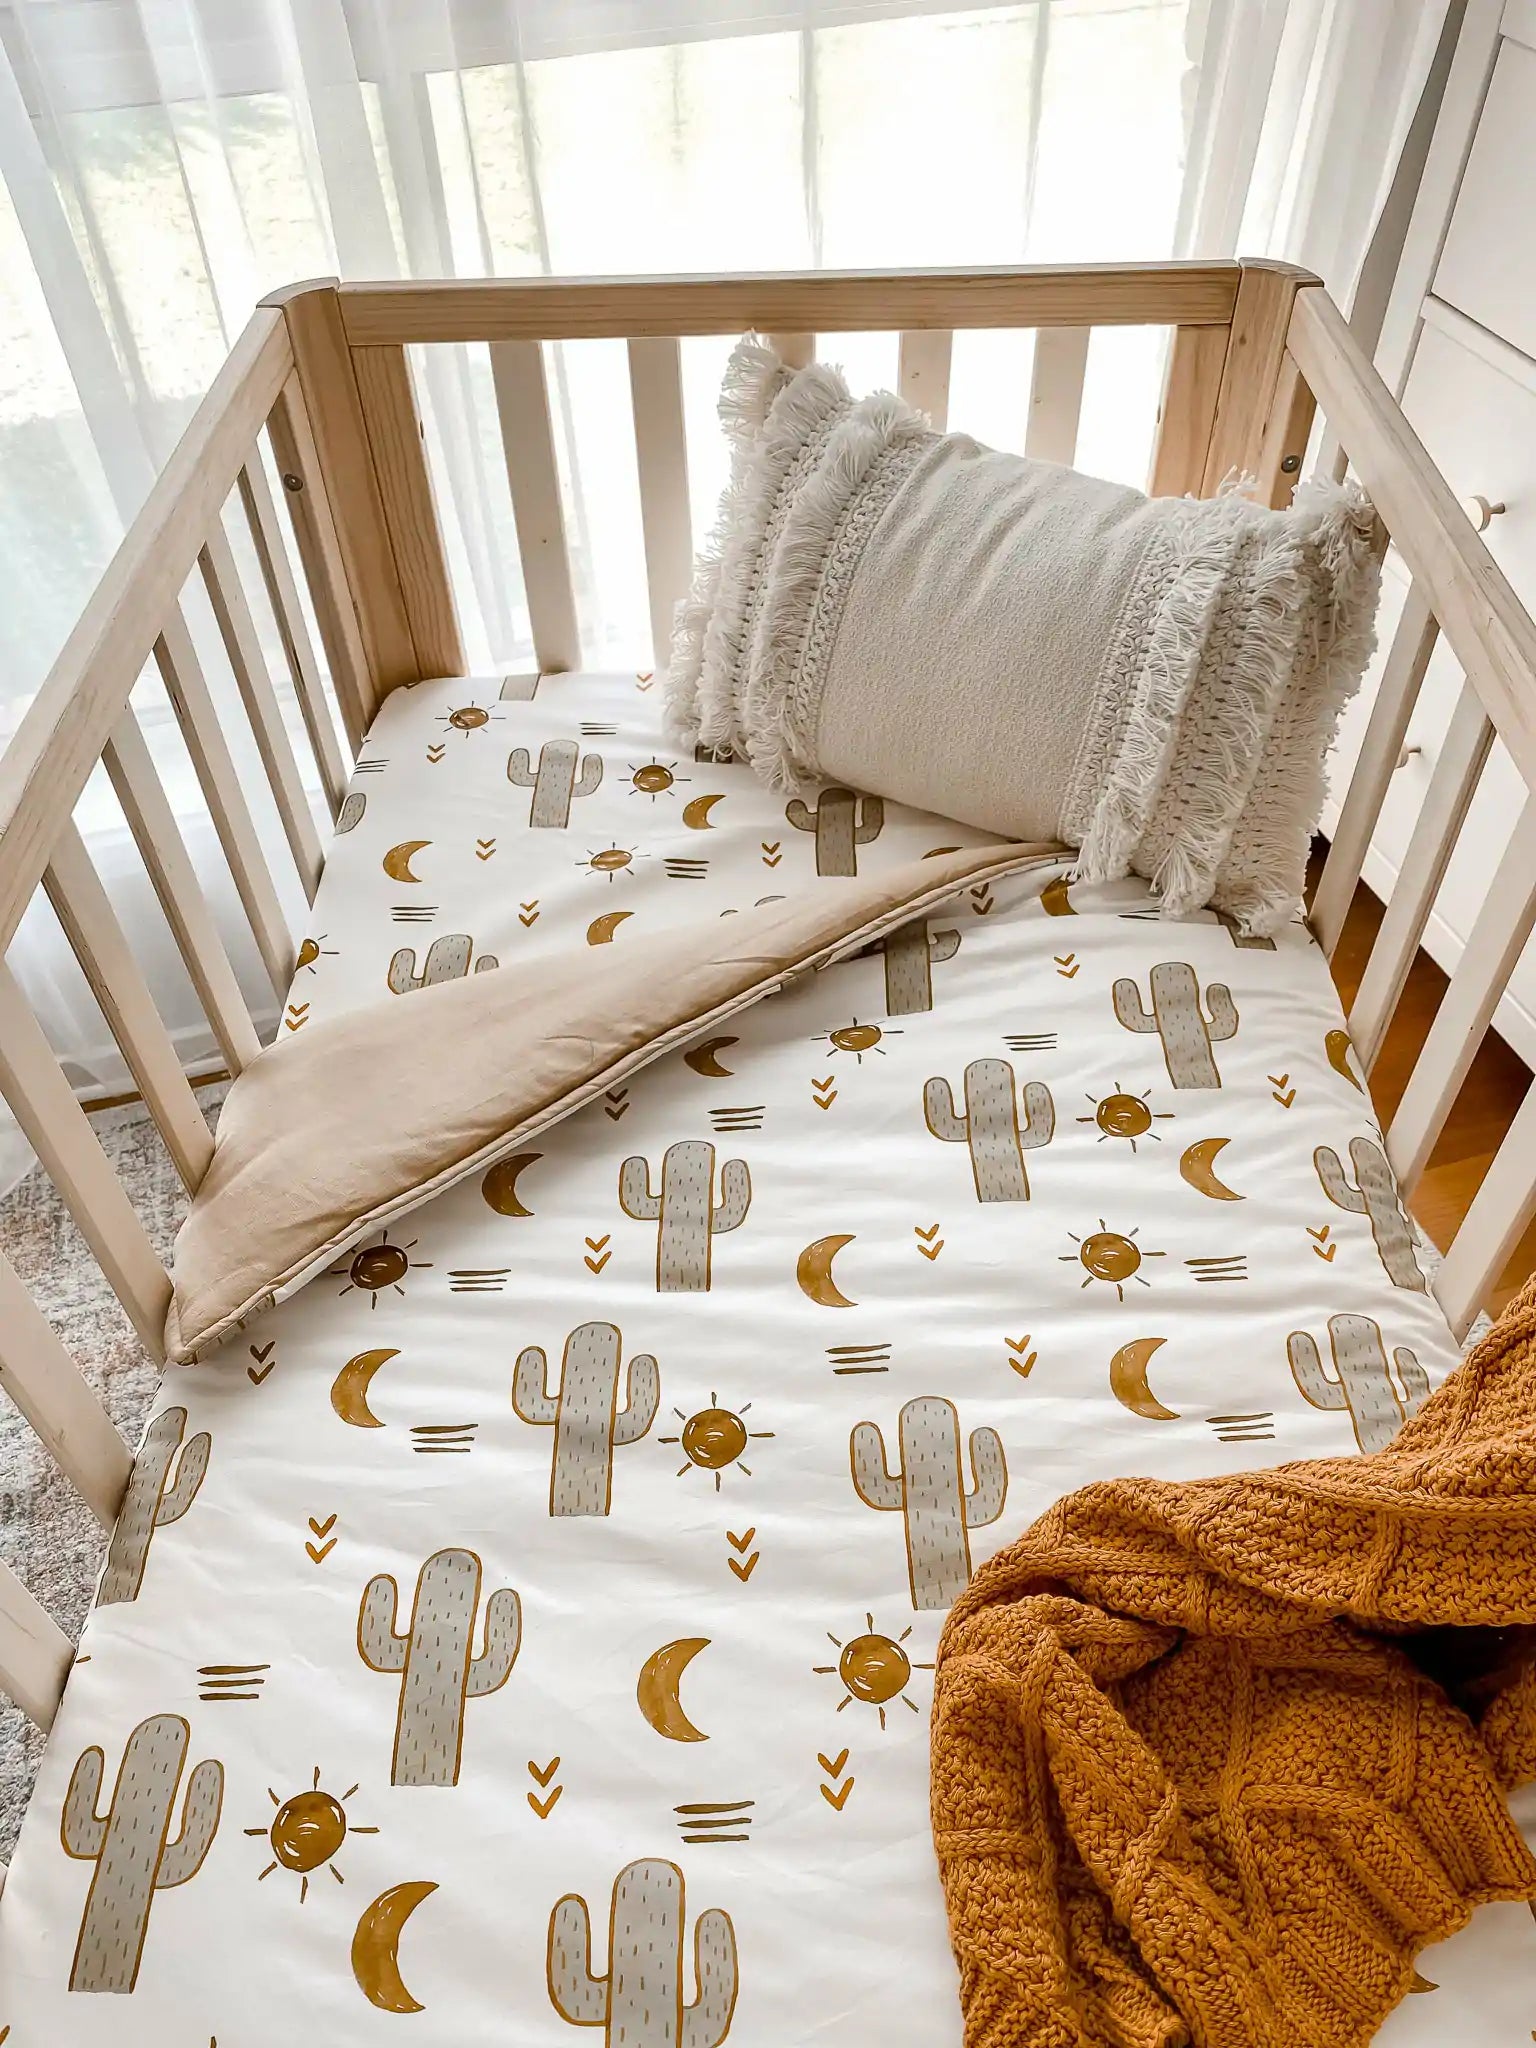 Green Cactuses, brown moons with a soft brown backing, makes for the perfect gender neutral nursery.